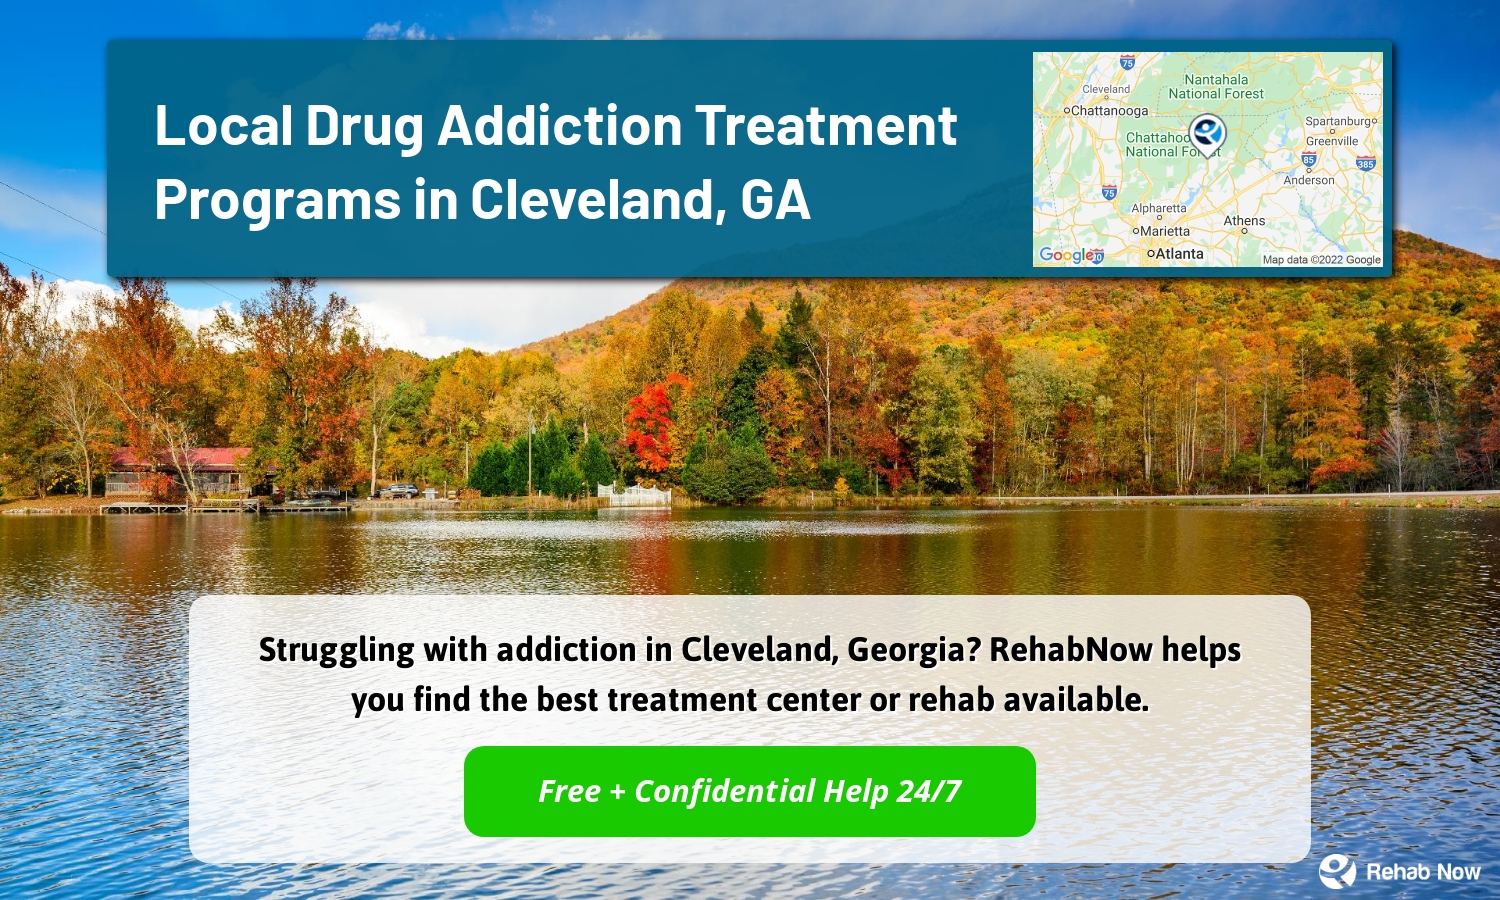 Struggling with addiction in Cleveland, Georgia? RehabNow helps you find the best treatment center or rehab available.